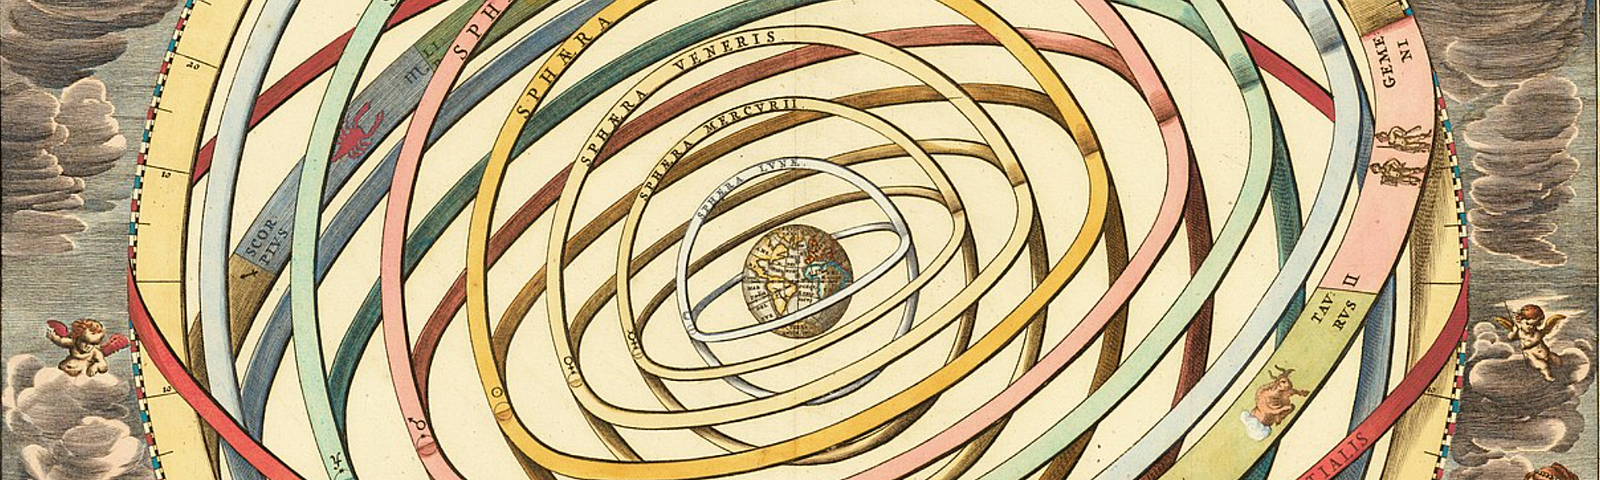 old school illustration of a globe with lots of rings around it